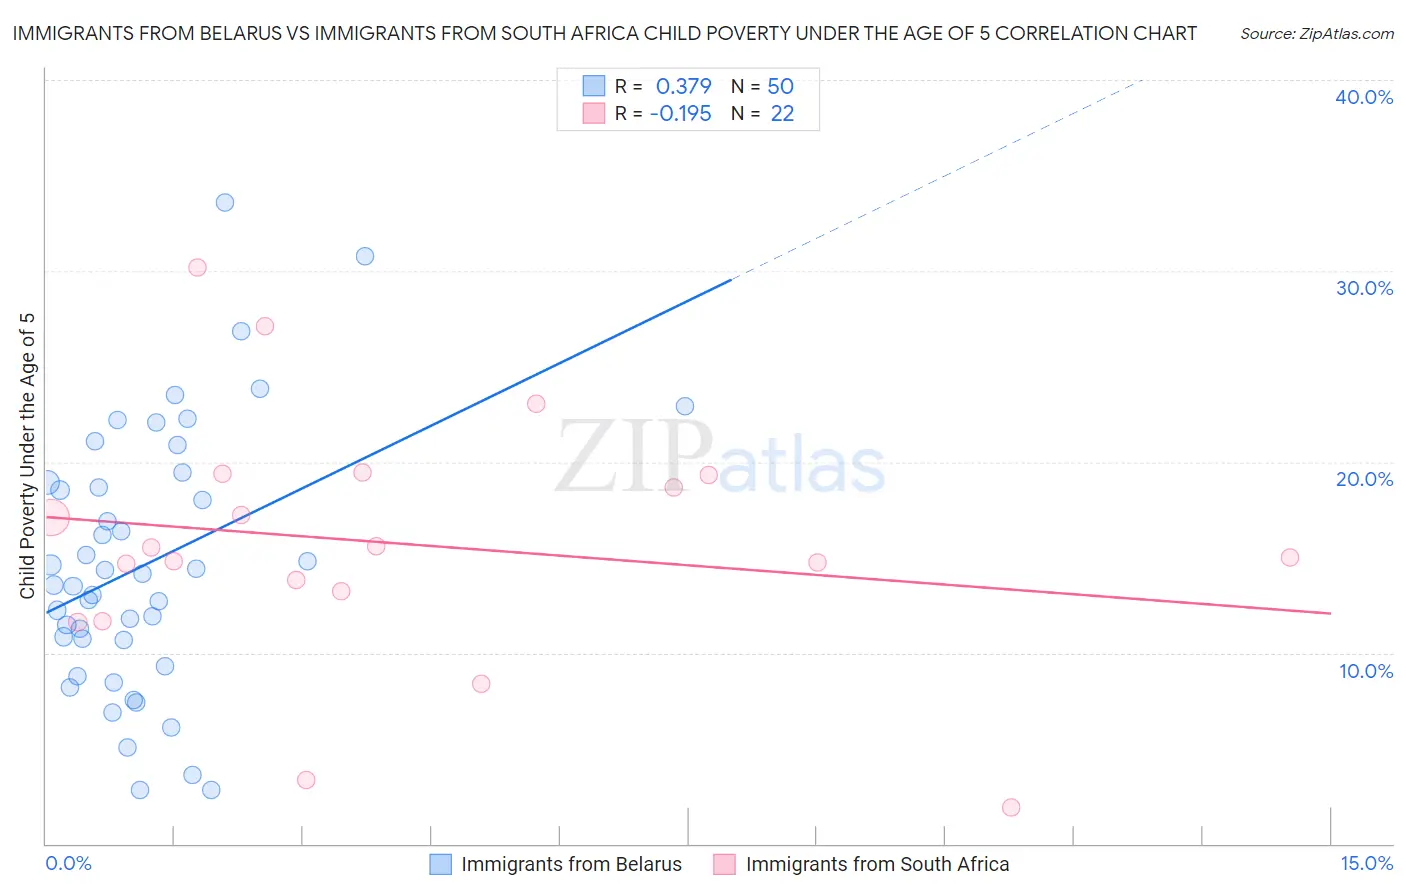 Immigrants from Belarus vs Immigrants from South Africa Child Poverty Under the Age of 5